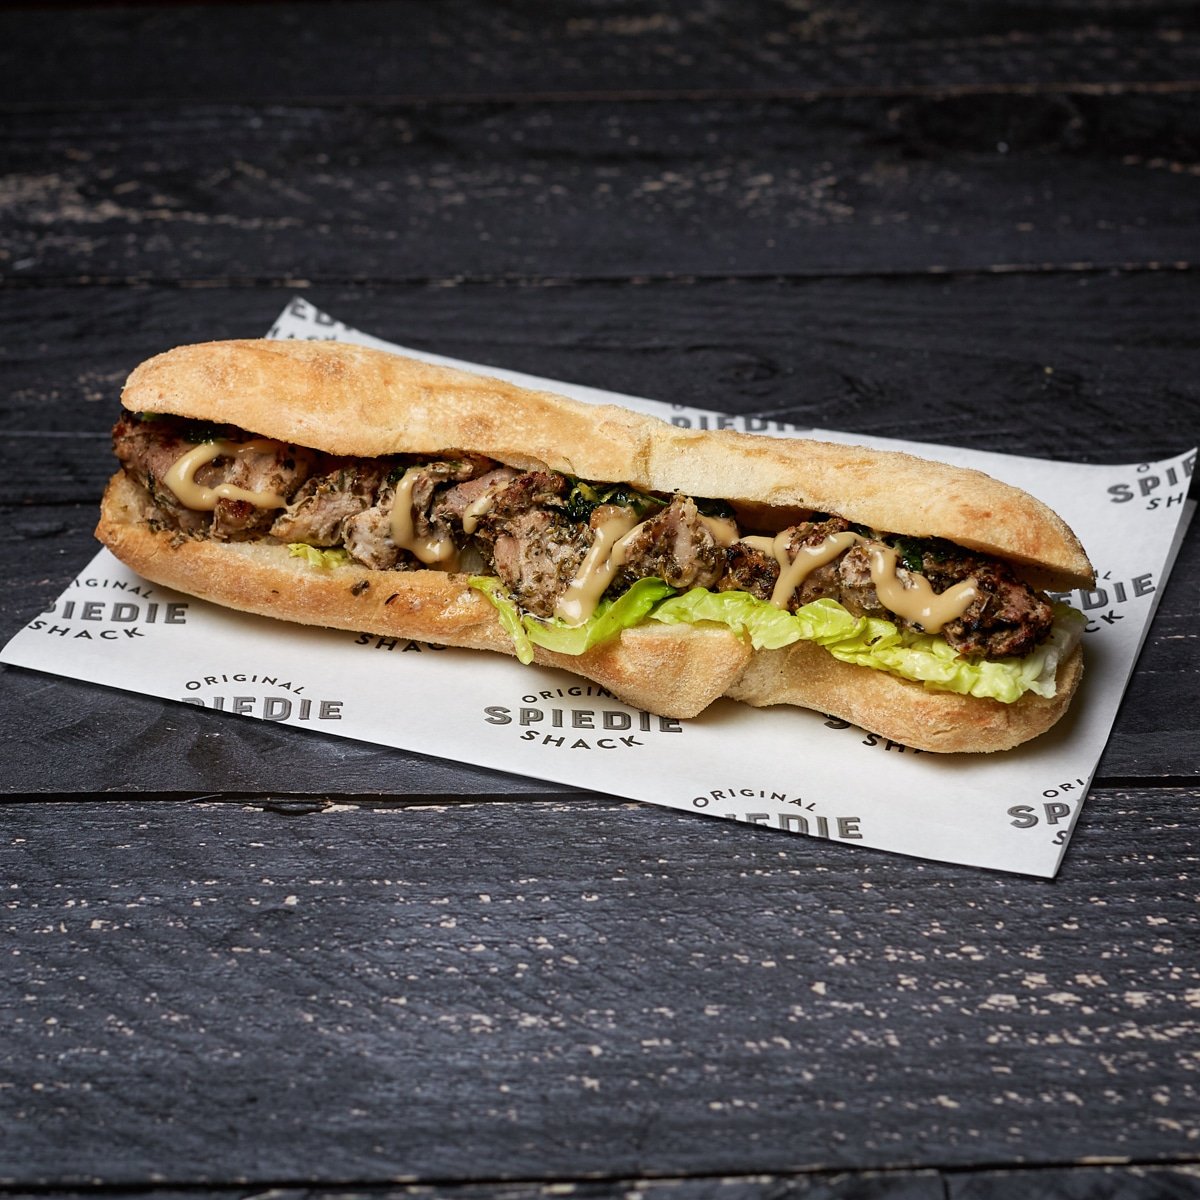 The spiedie series: Pork; marinated free-range pork grilled over hot charcoal and served in our freshly baked ciabatta sub with honey mustard dressing #spiedieshack #spiedies #charcoalgrill #freerange #pork #spiedie #ciabatta #submarinesandwich #sandwich #streetfood #startup